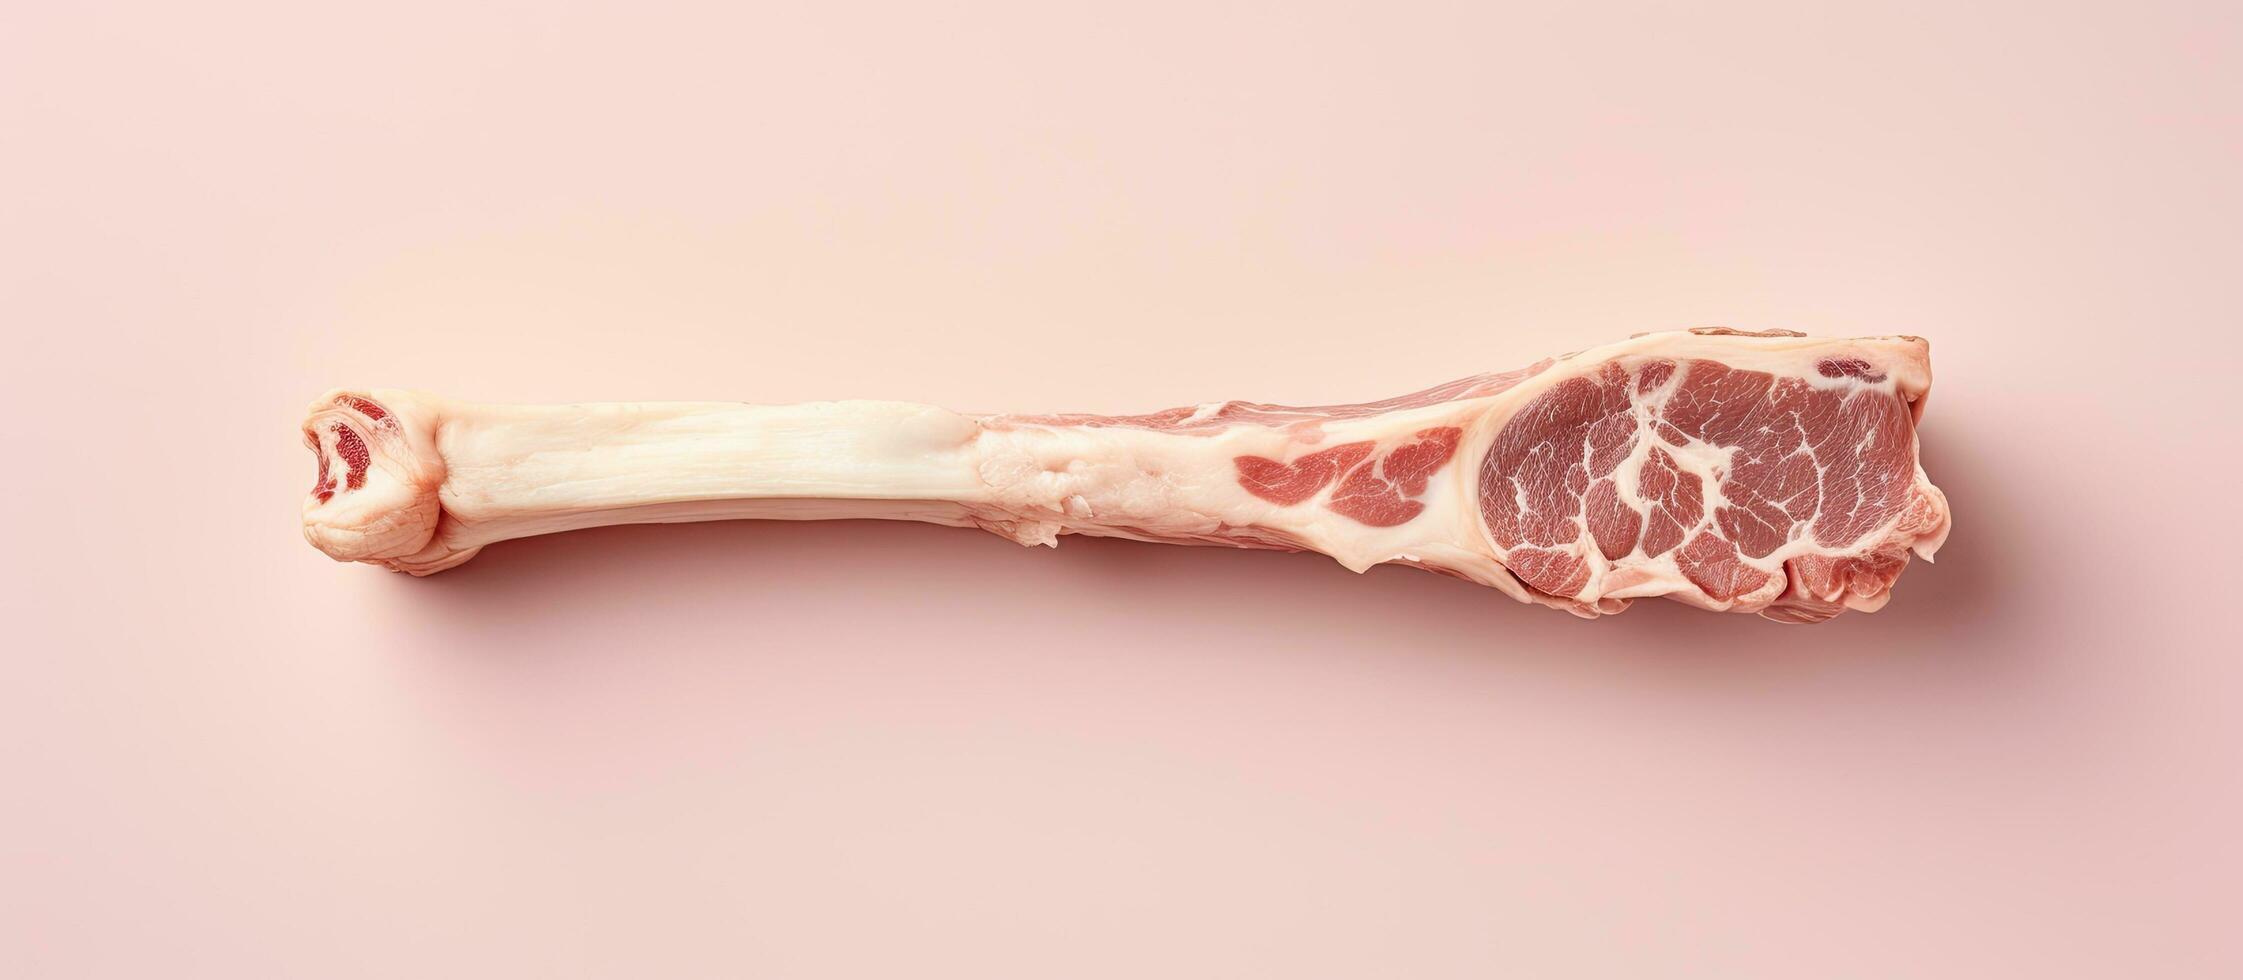 Photo of a raw steak on a vibrant pink background with copy space